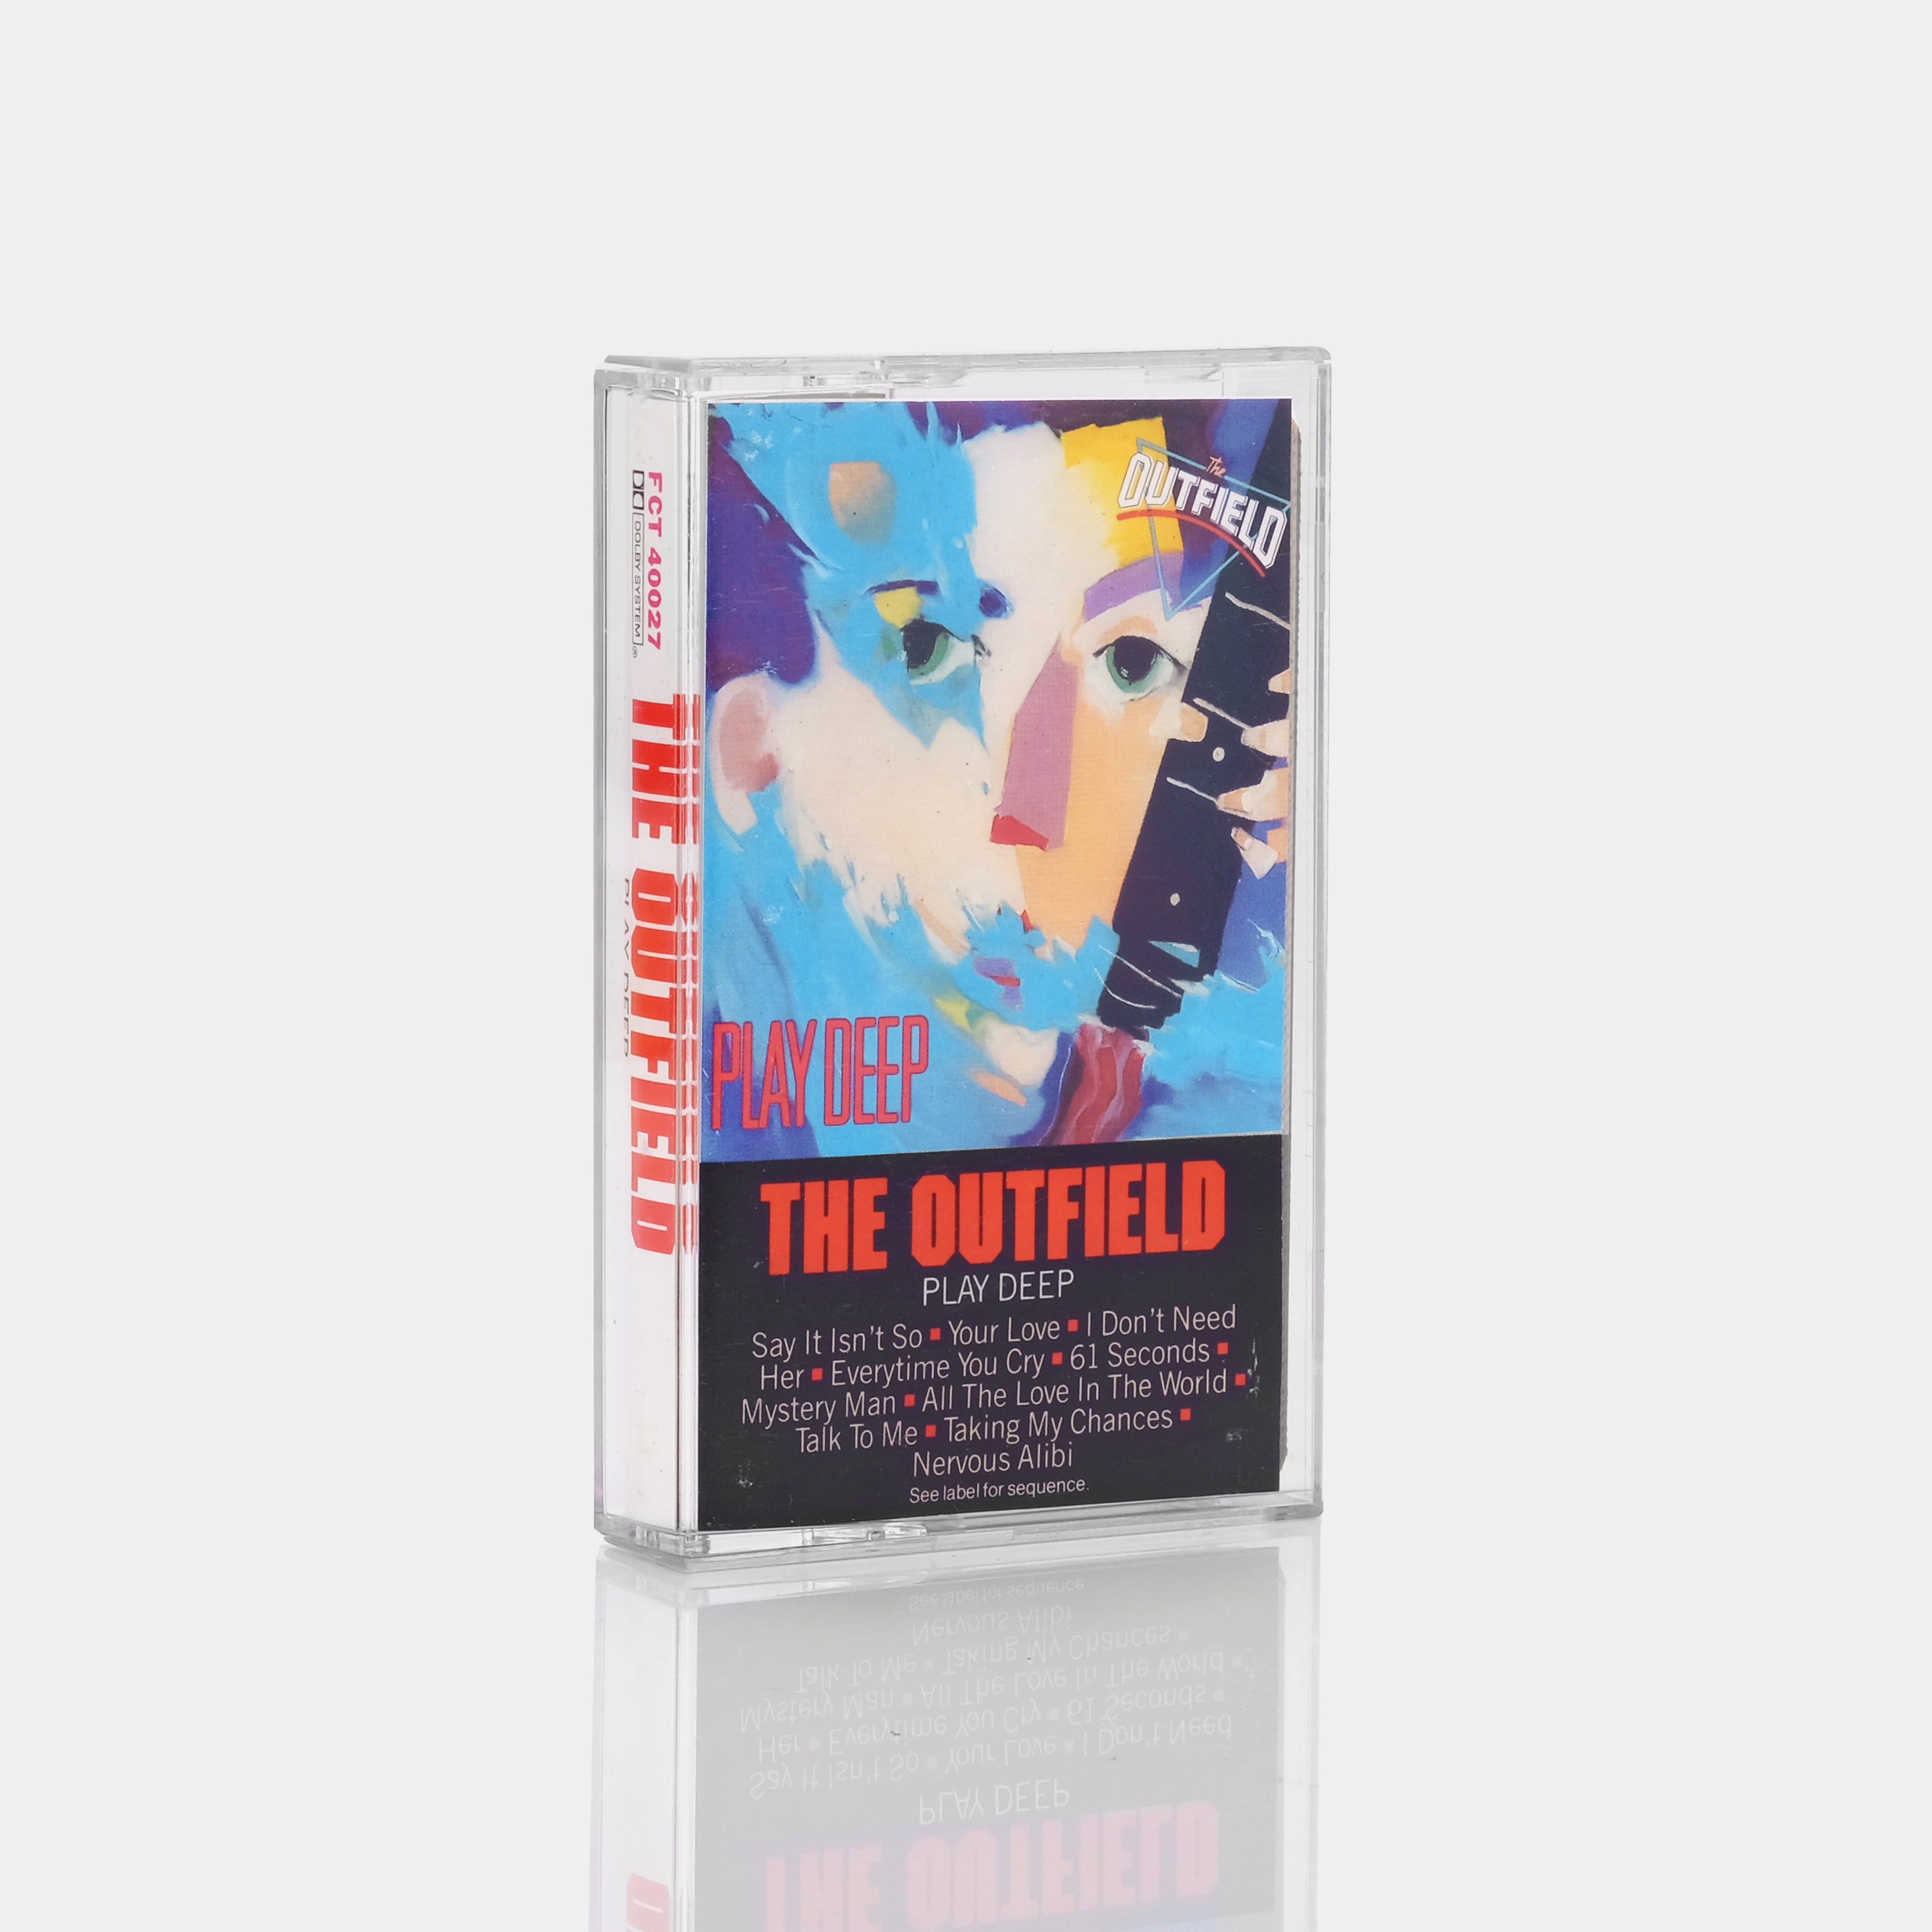 The Outfield - Play Deep Cassette Tape